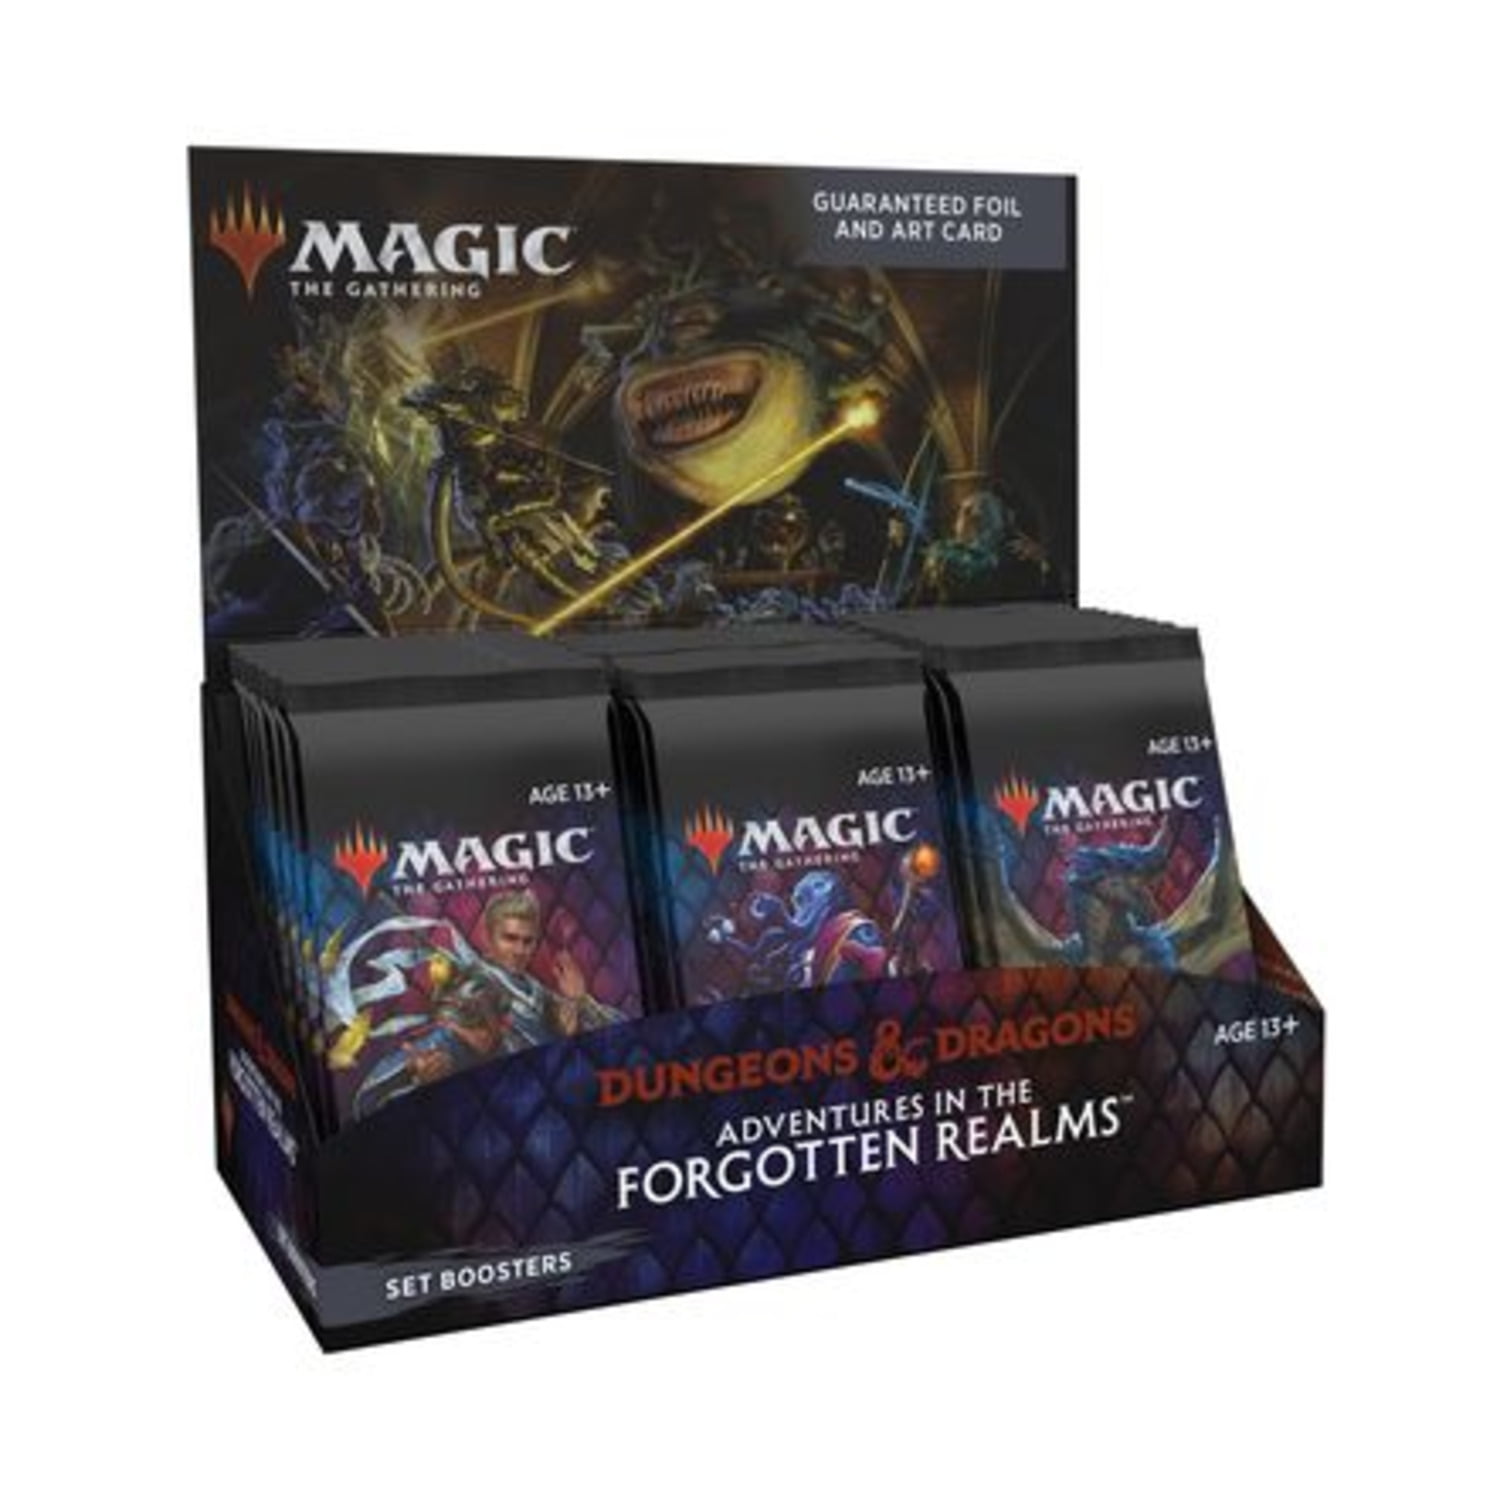 Bundle of 1 Adventures in The Forgotten Realms MTG Collector Booster Box 1 Dungeons & Dragons Essentials Kit D&D Box Set 